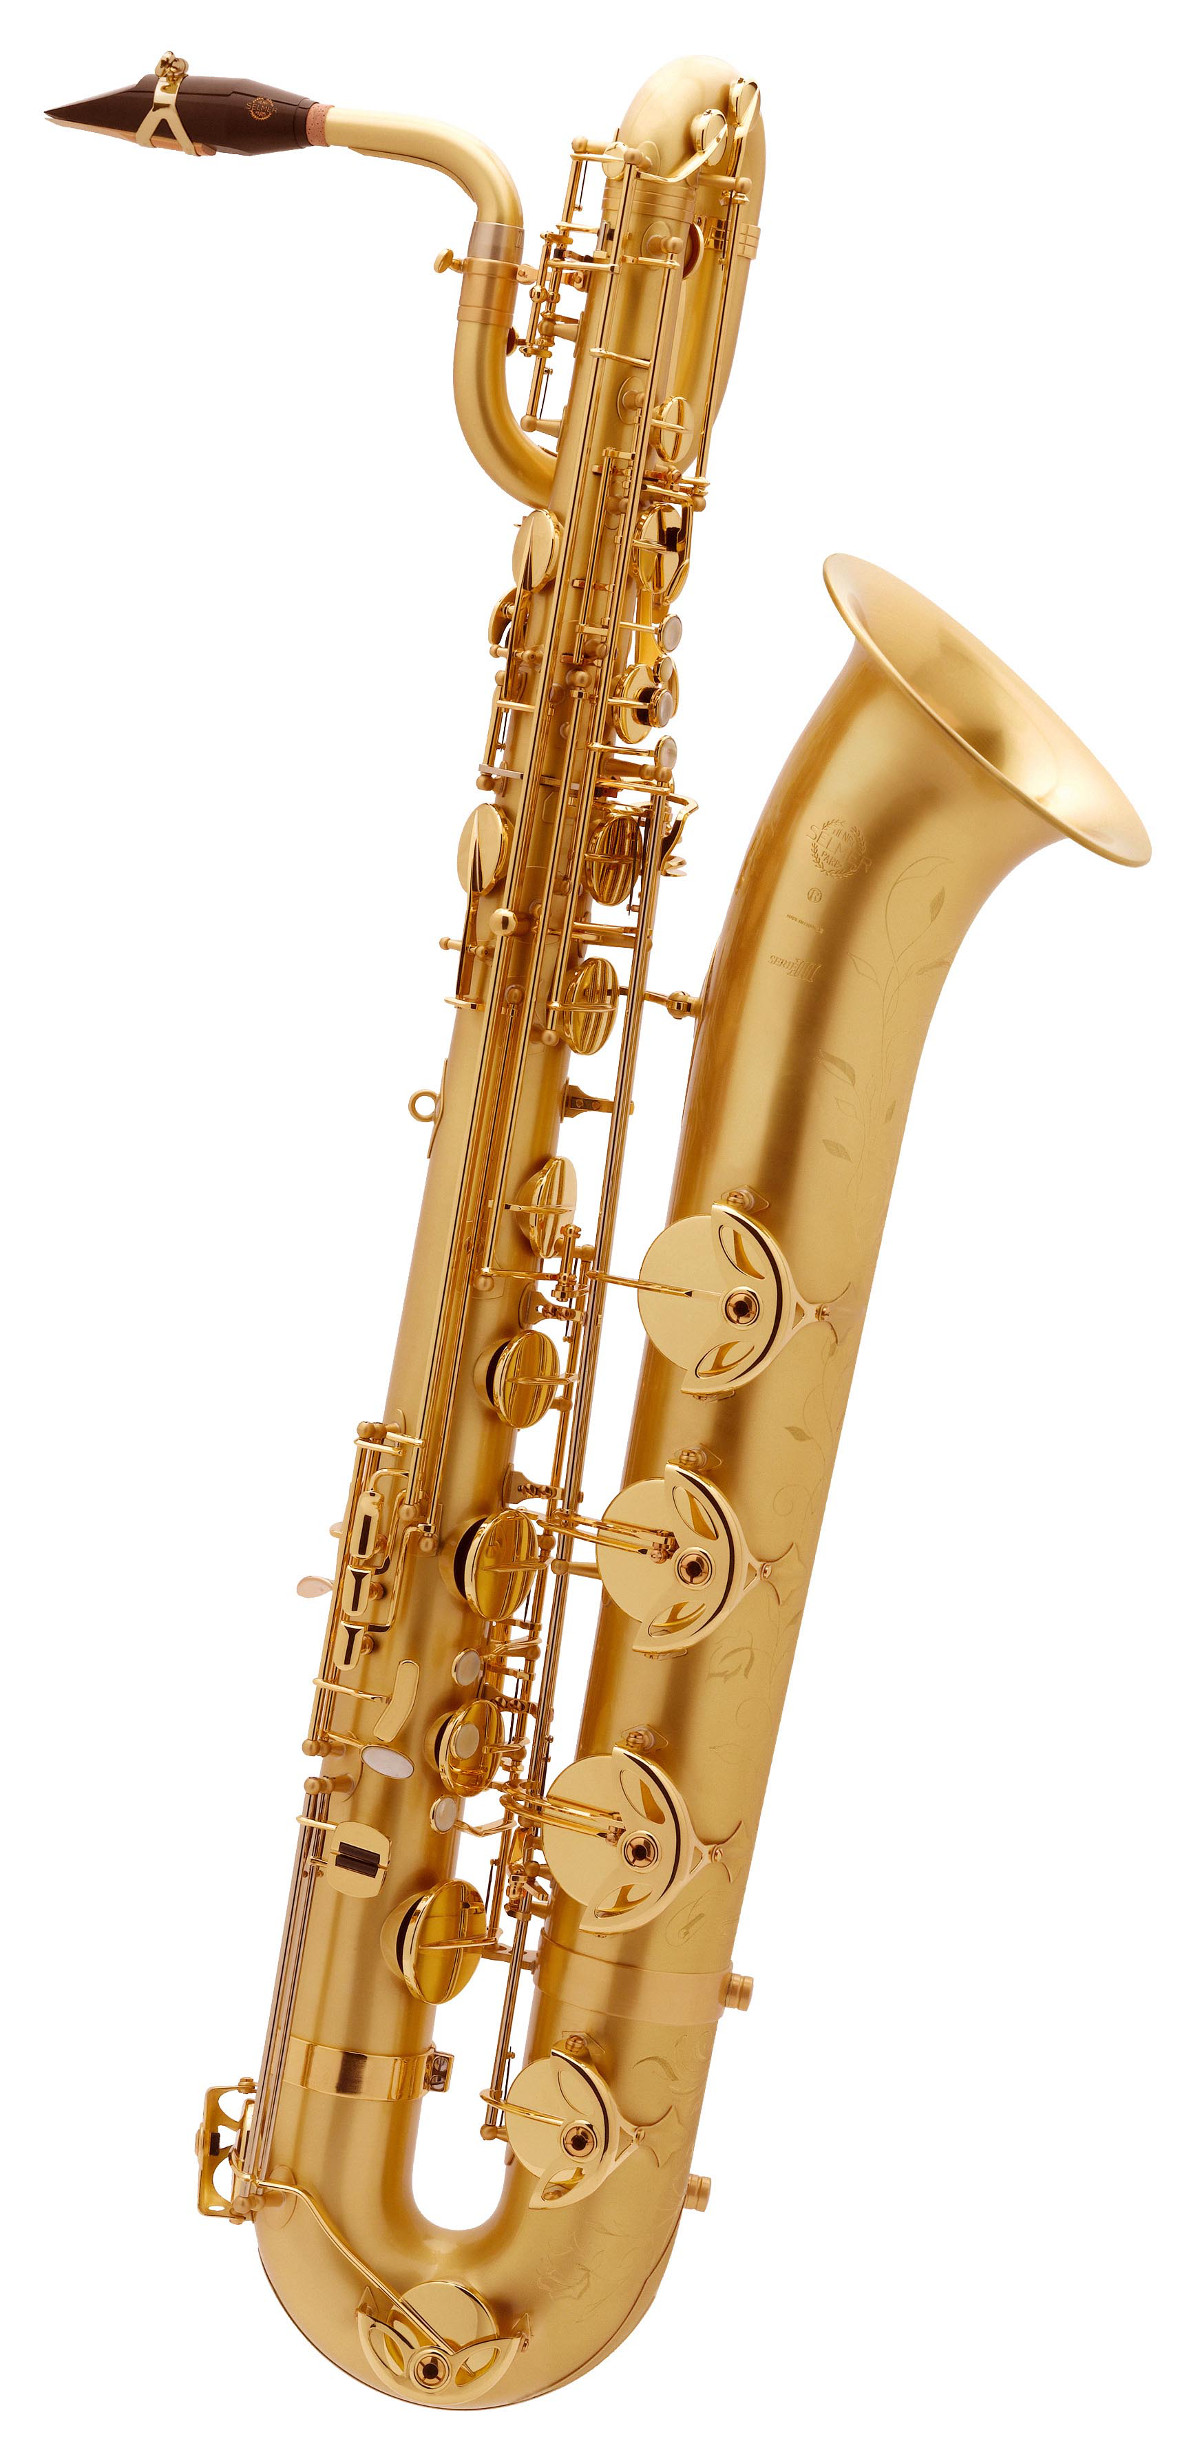 SELMER SERIES III JUBILE BGG GO (BRUSHED GOLD LACQUER ENGRAVED / LACQUER KEYS)